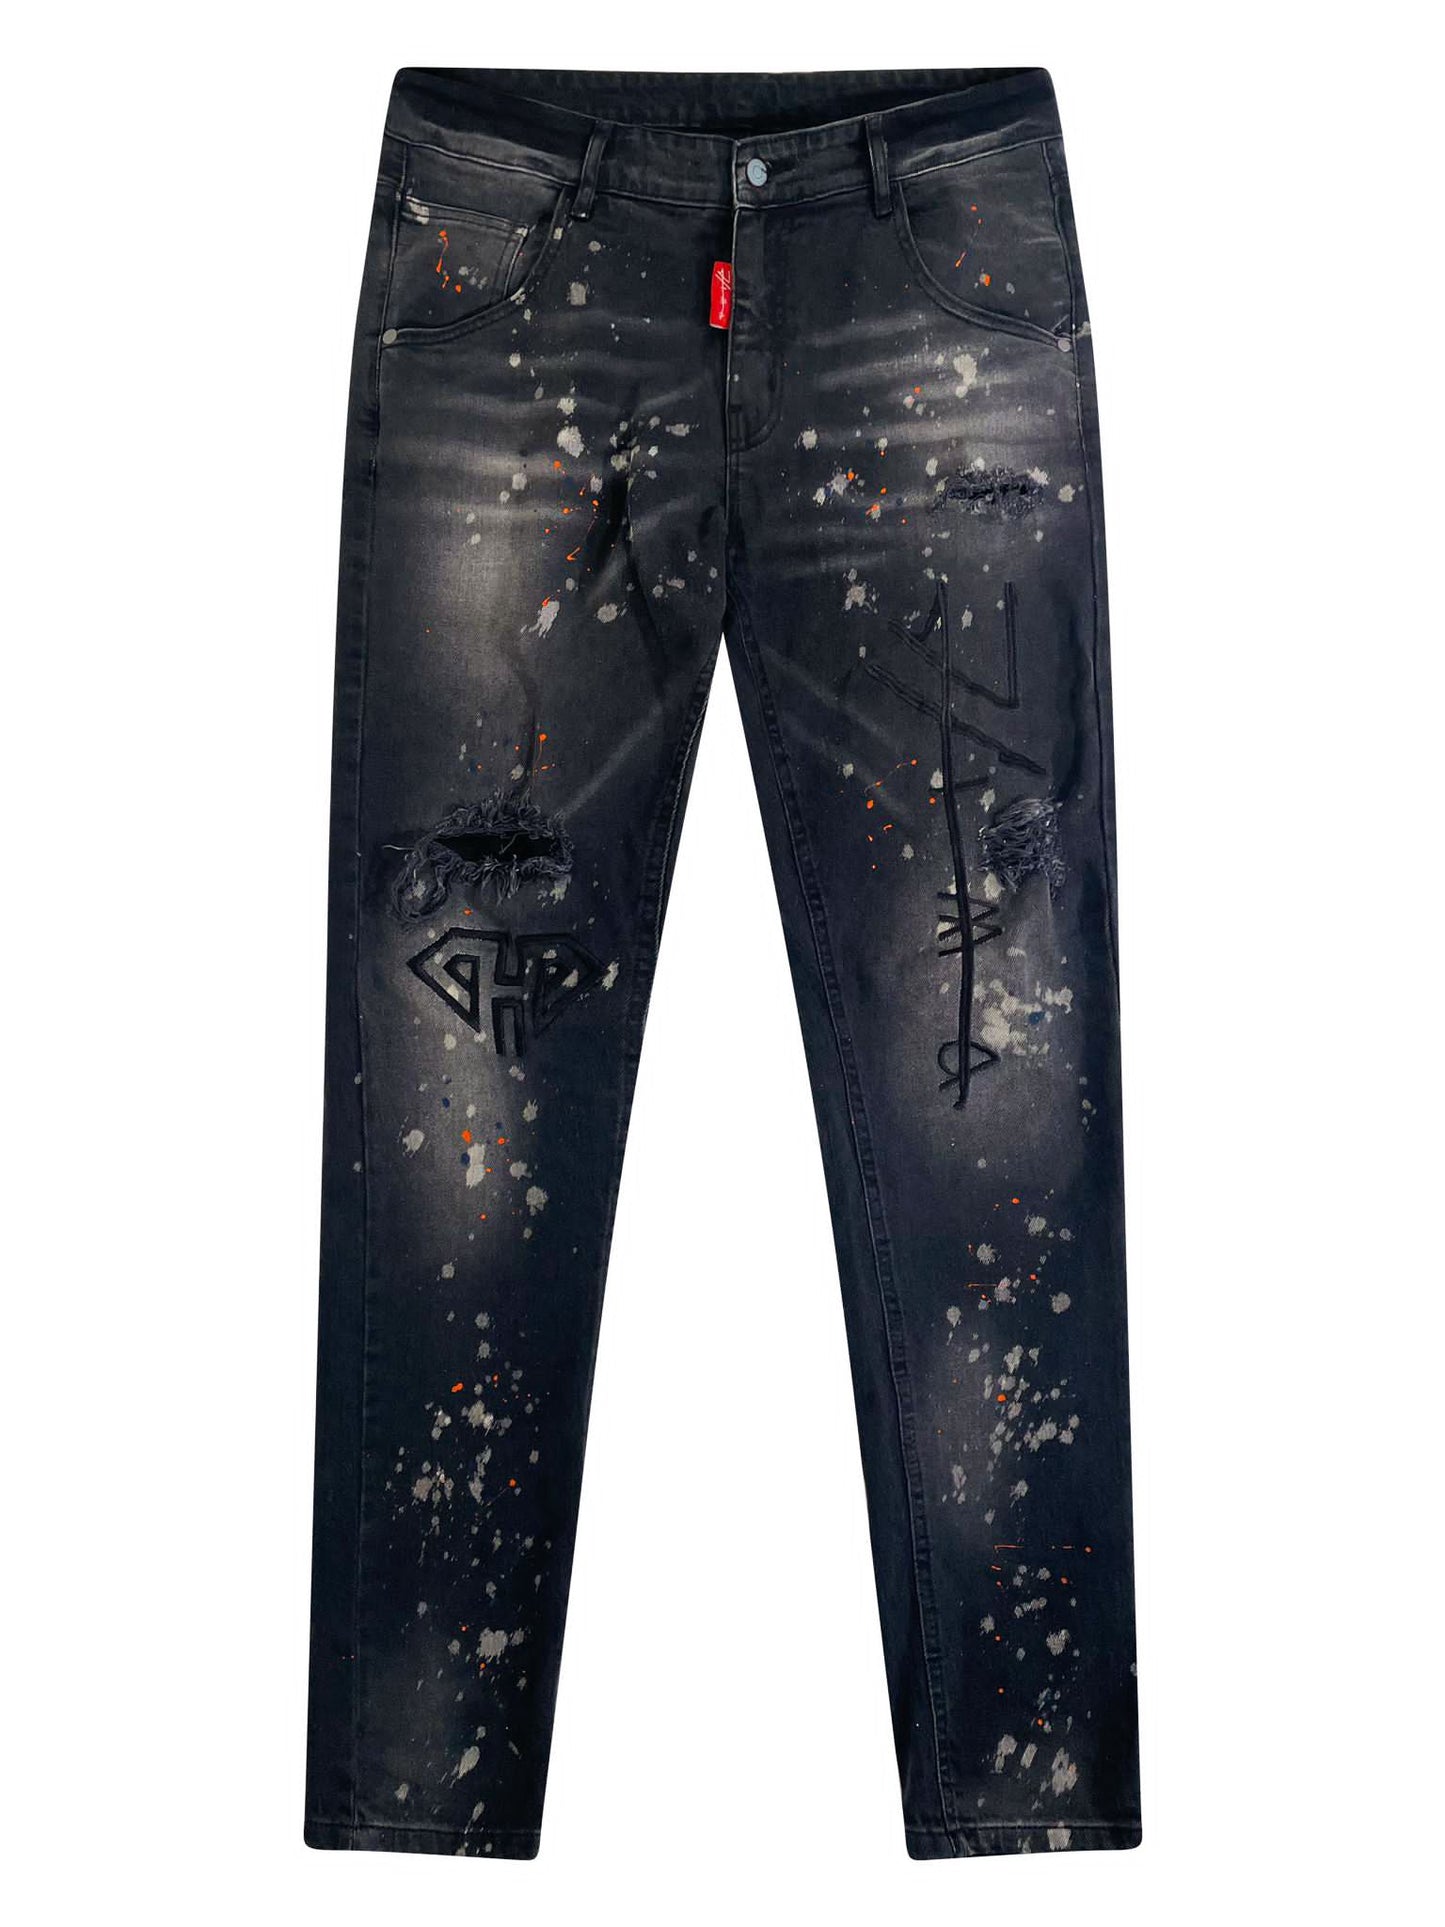 Hima Embroidery Jeans